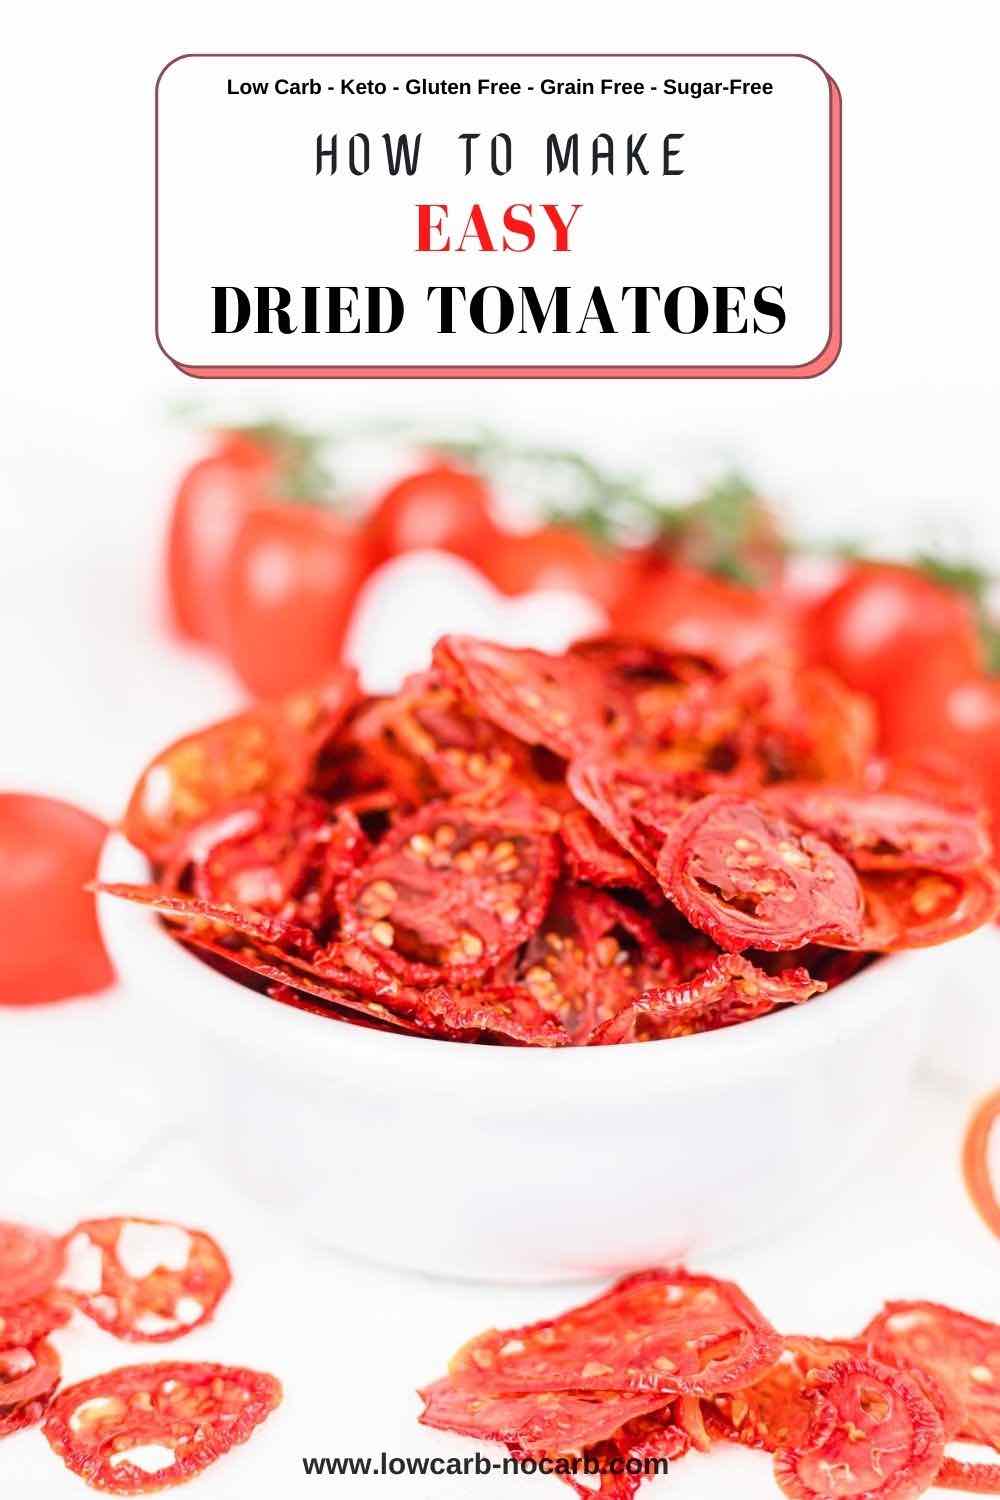 How to make easy dried tomatoes.